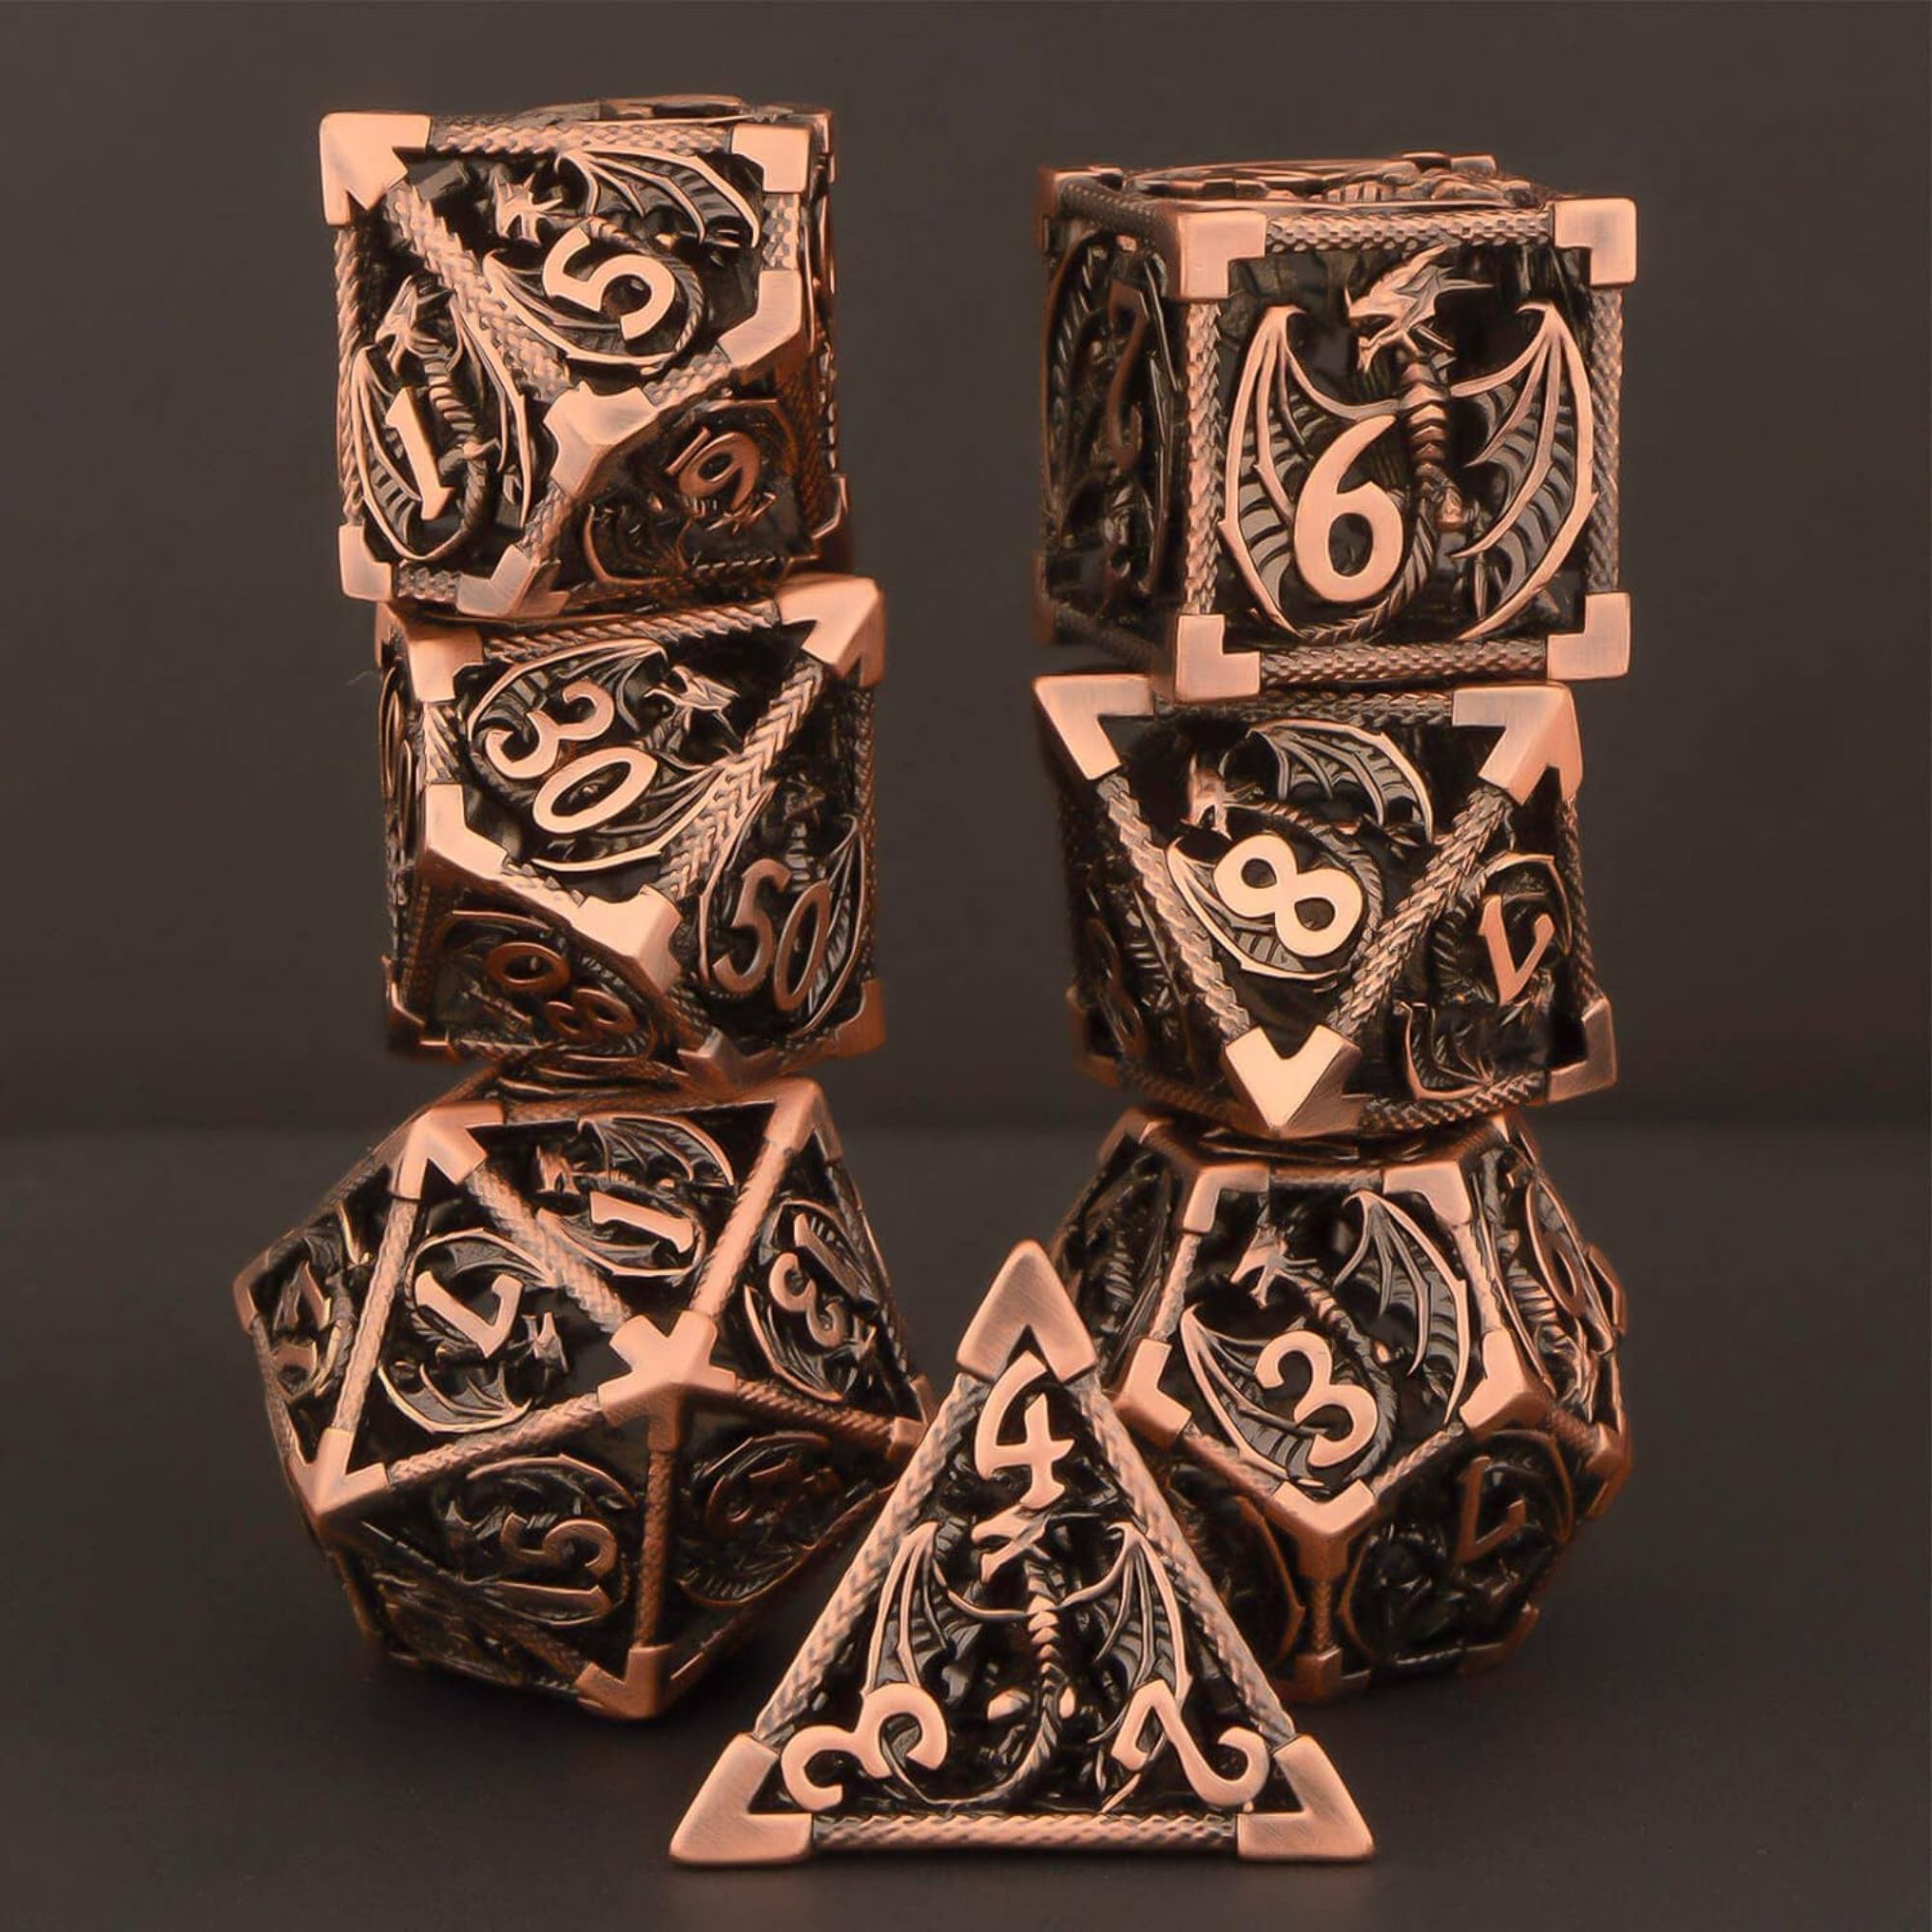 Product still of the KERWELLSI D&D Hollow Metal Dice Set on a white background